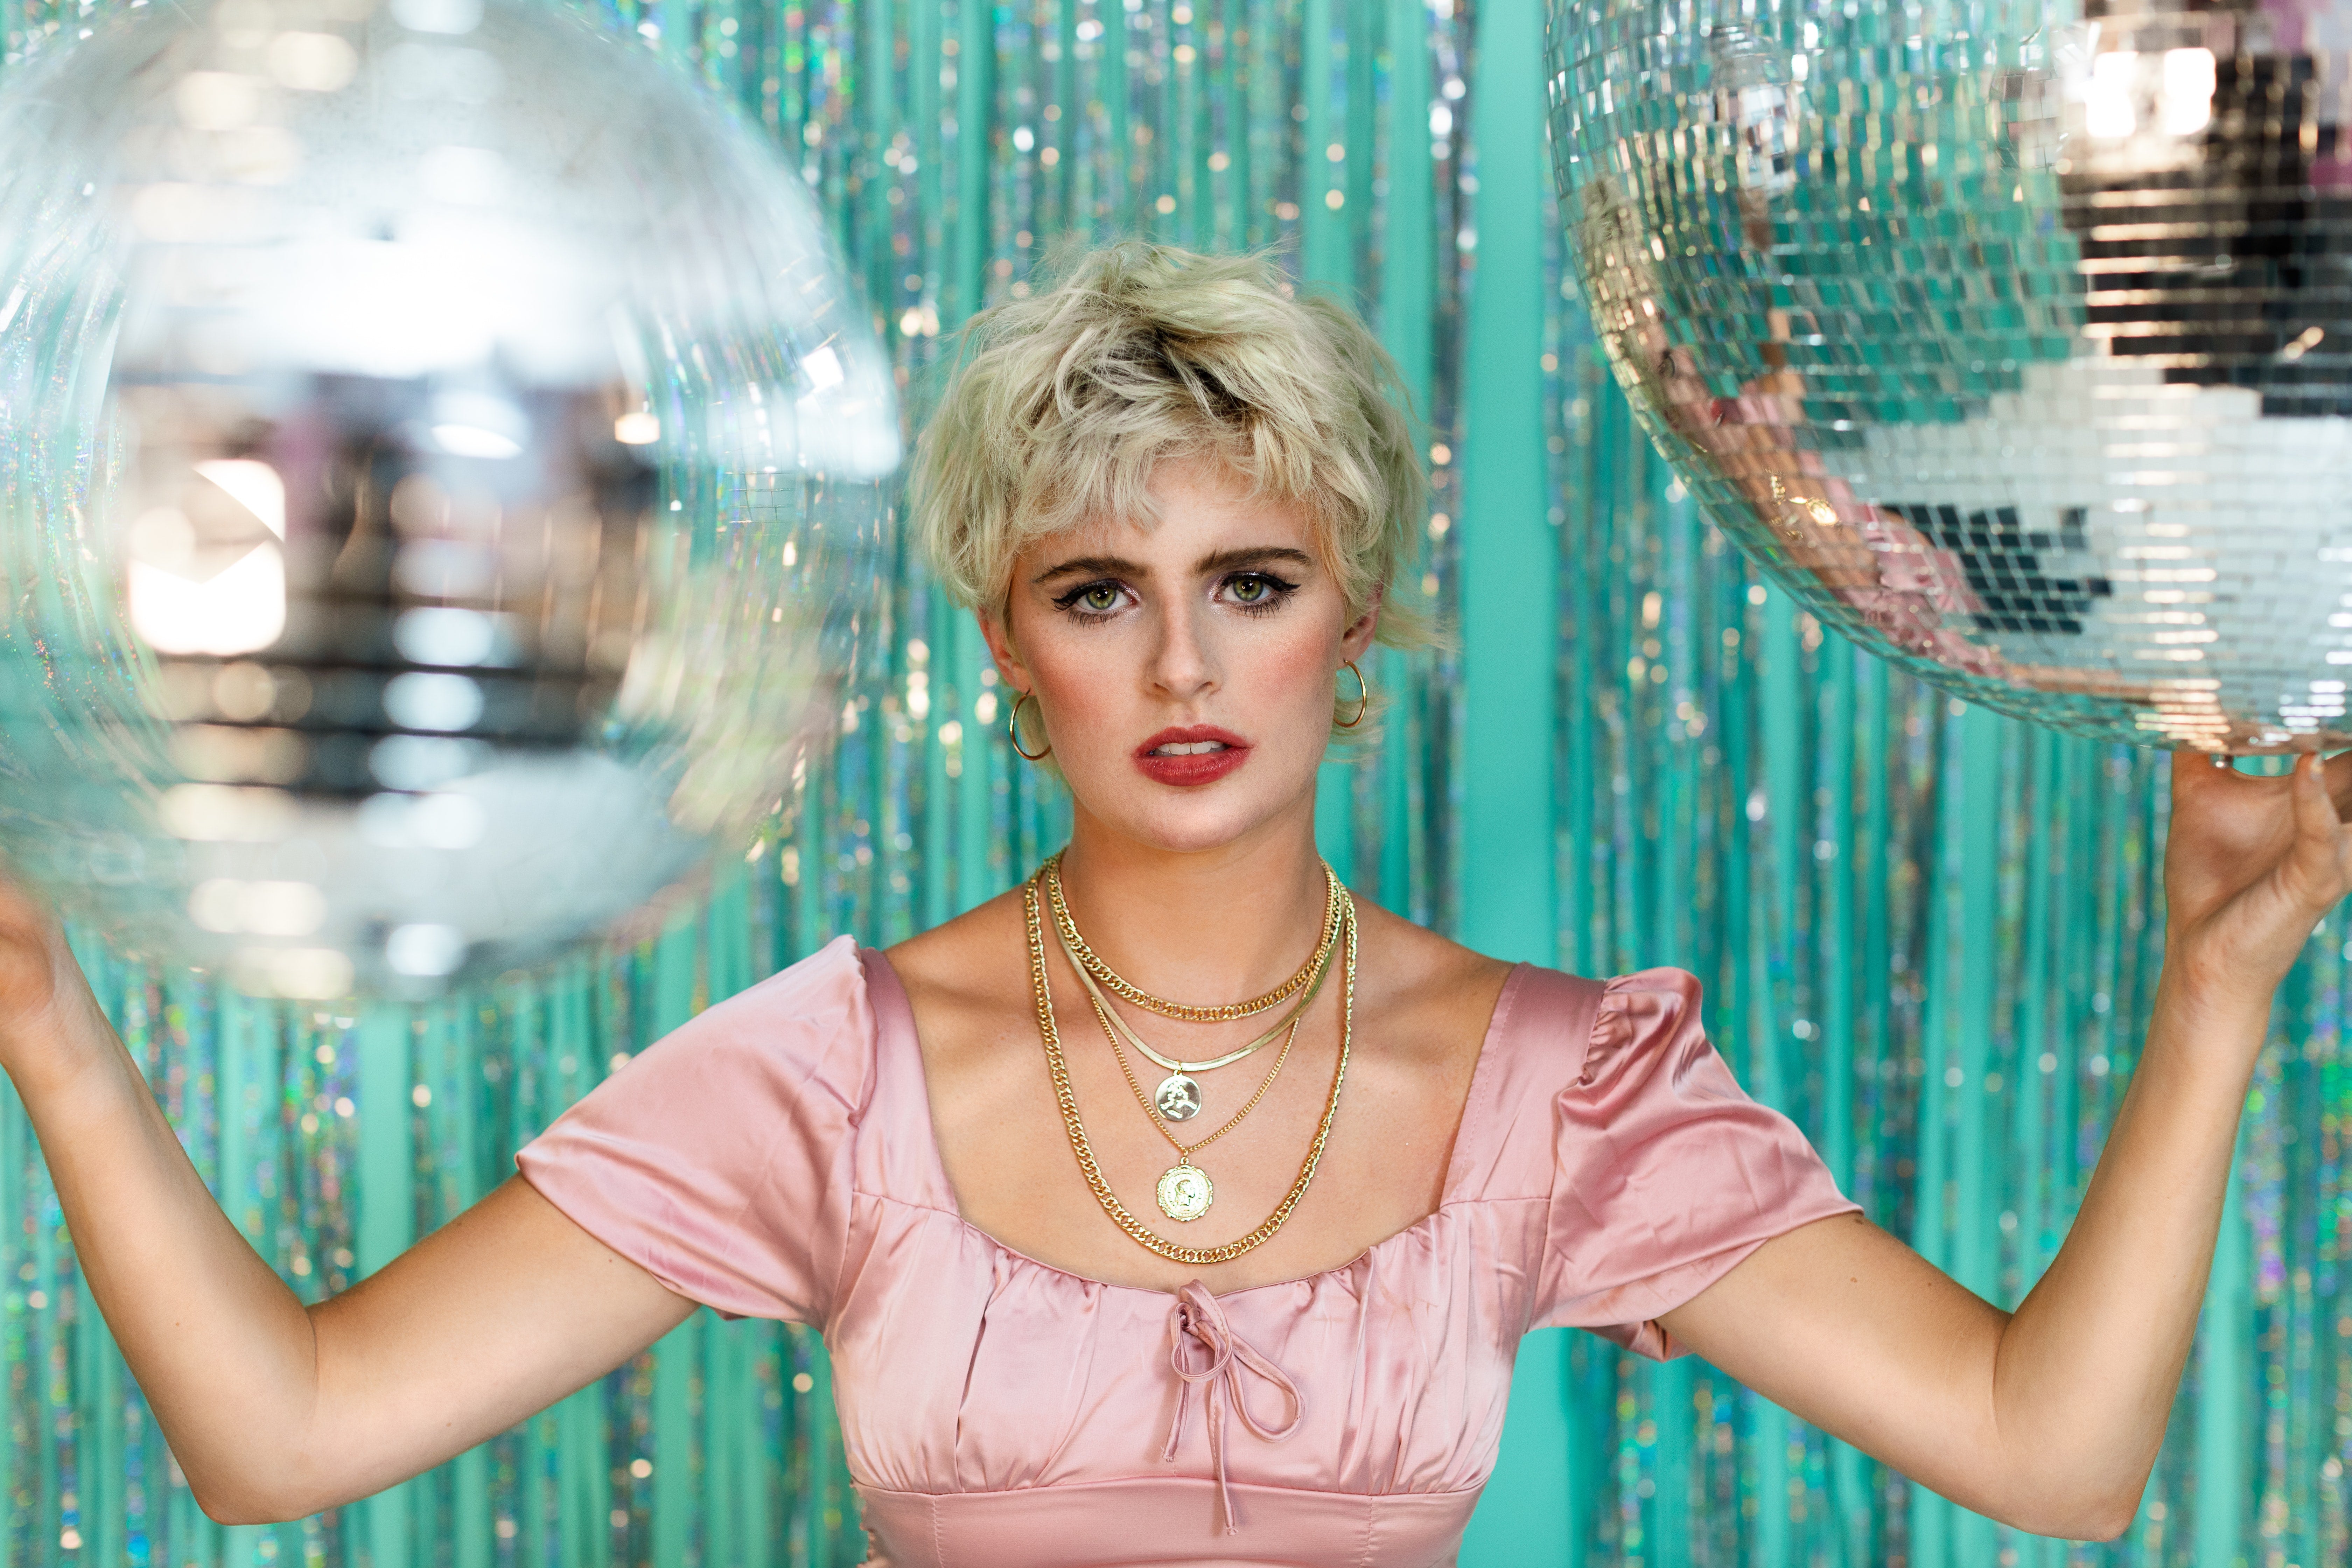 short-haired blonde woman wearing a vintage pink dress and gold necklaces and holding a disco ball on each hand